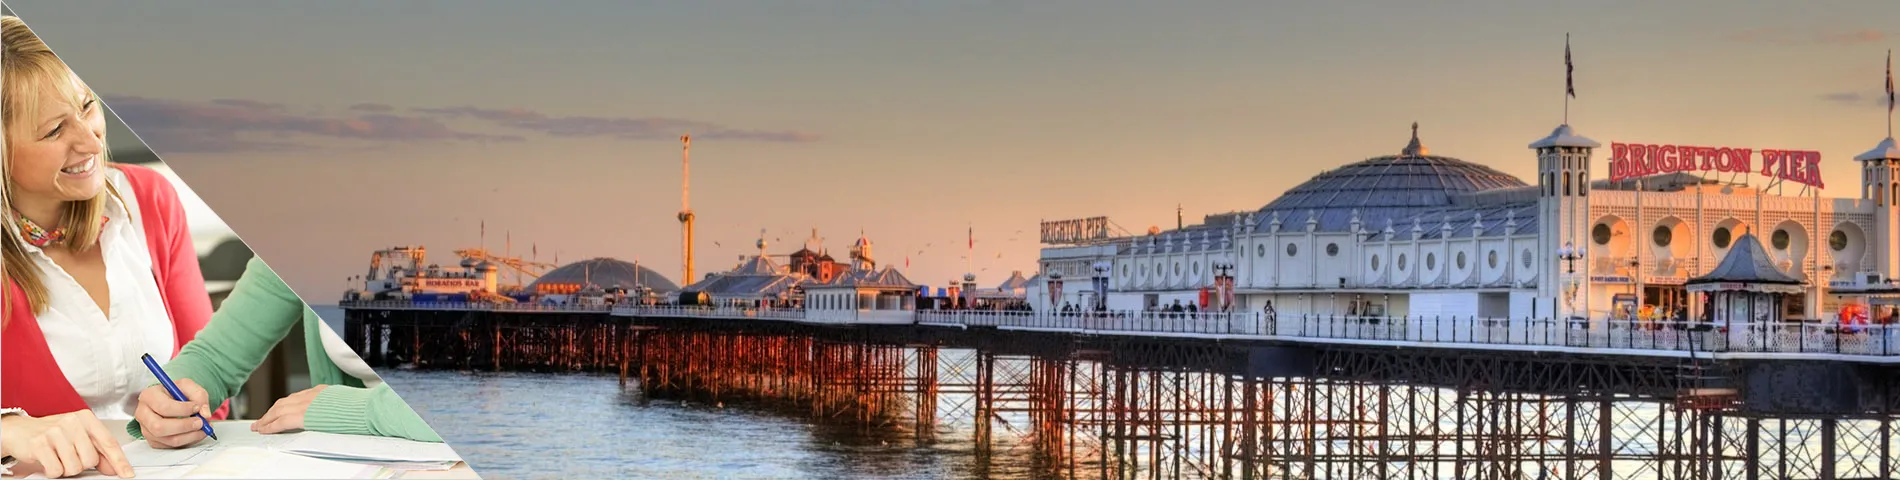 Brighton - Study & Live in your Teacher\'s Home